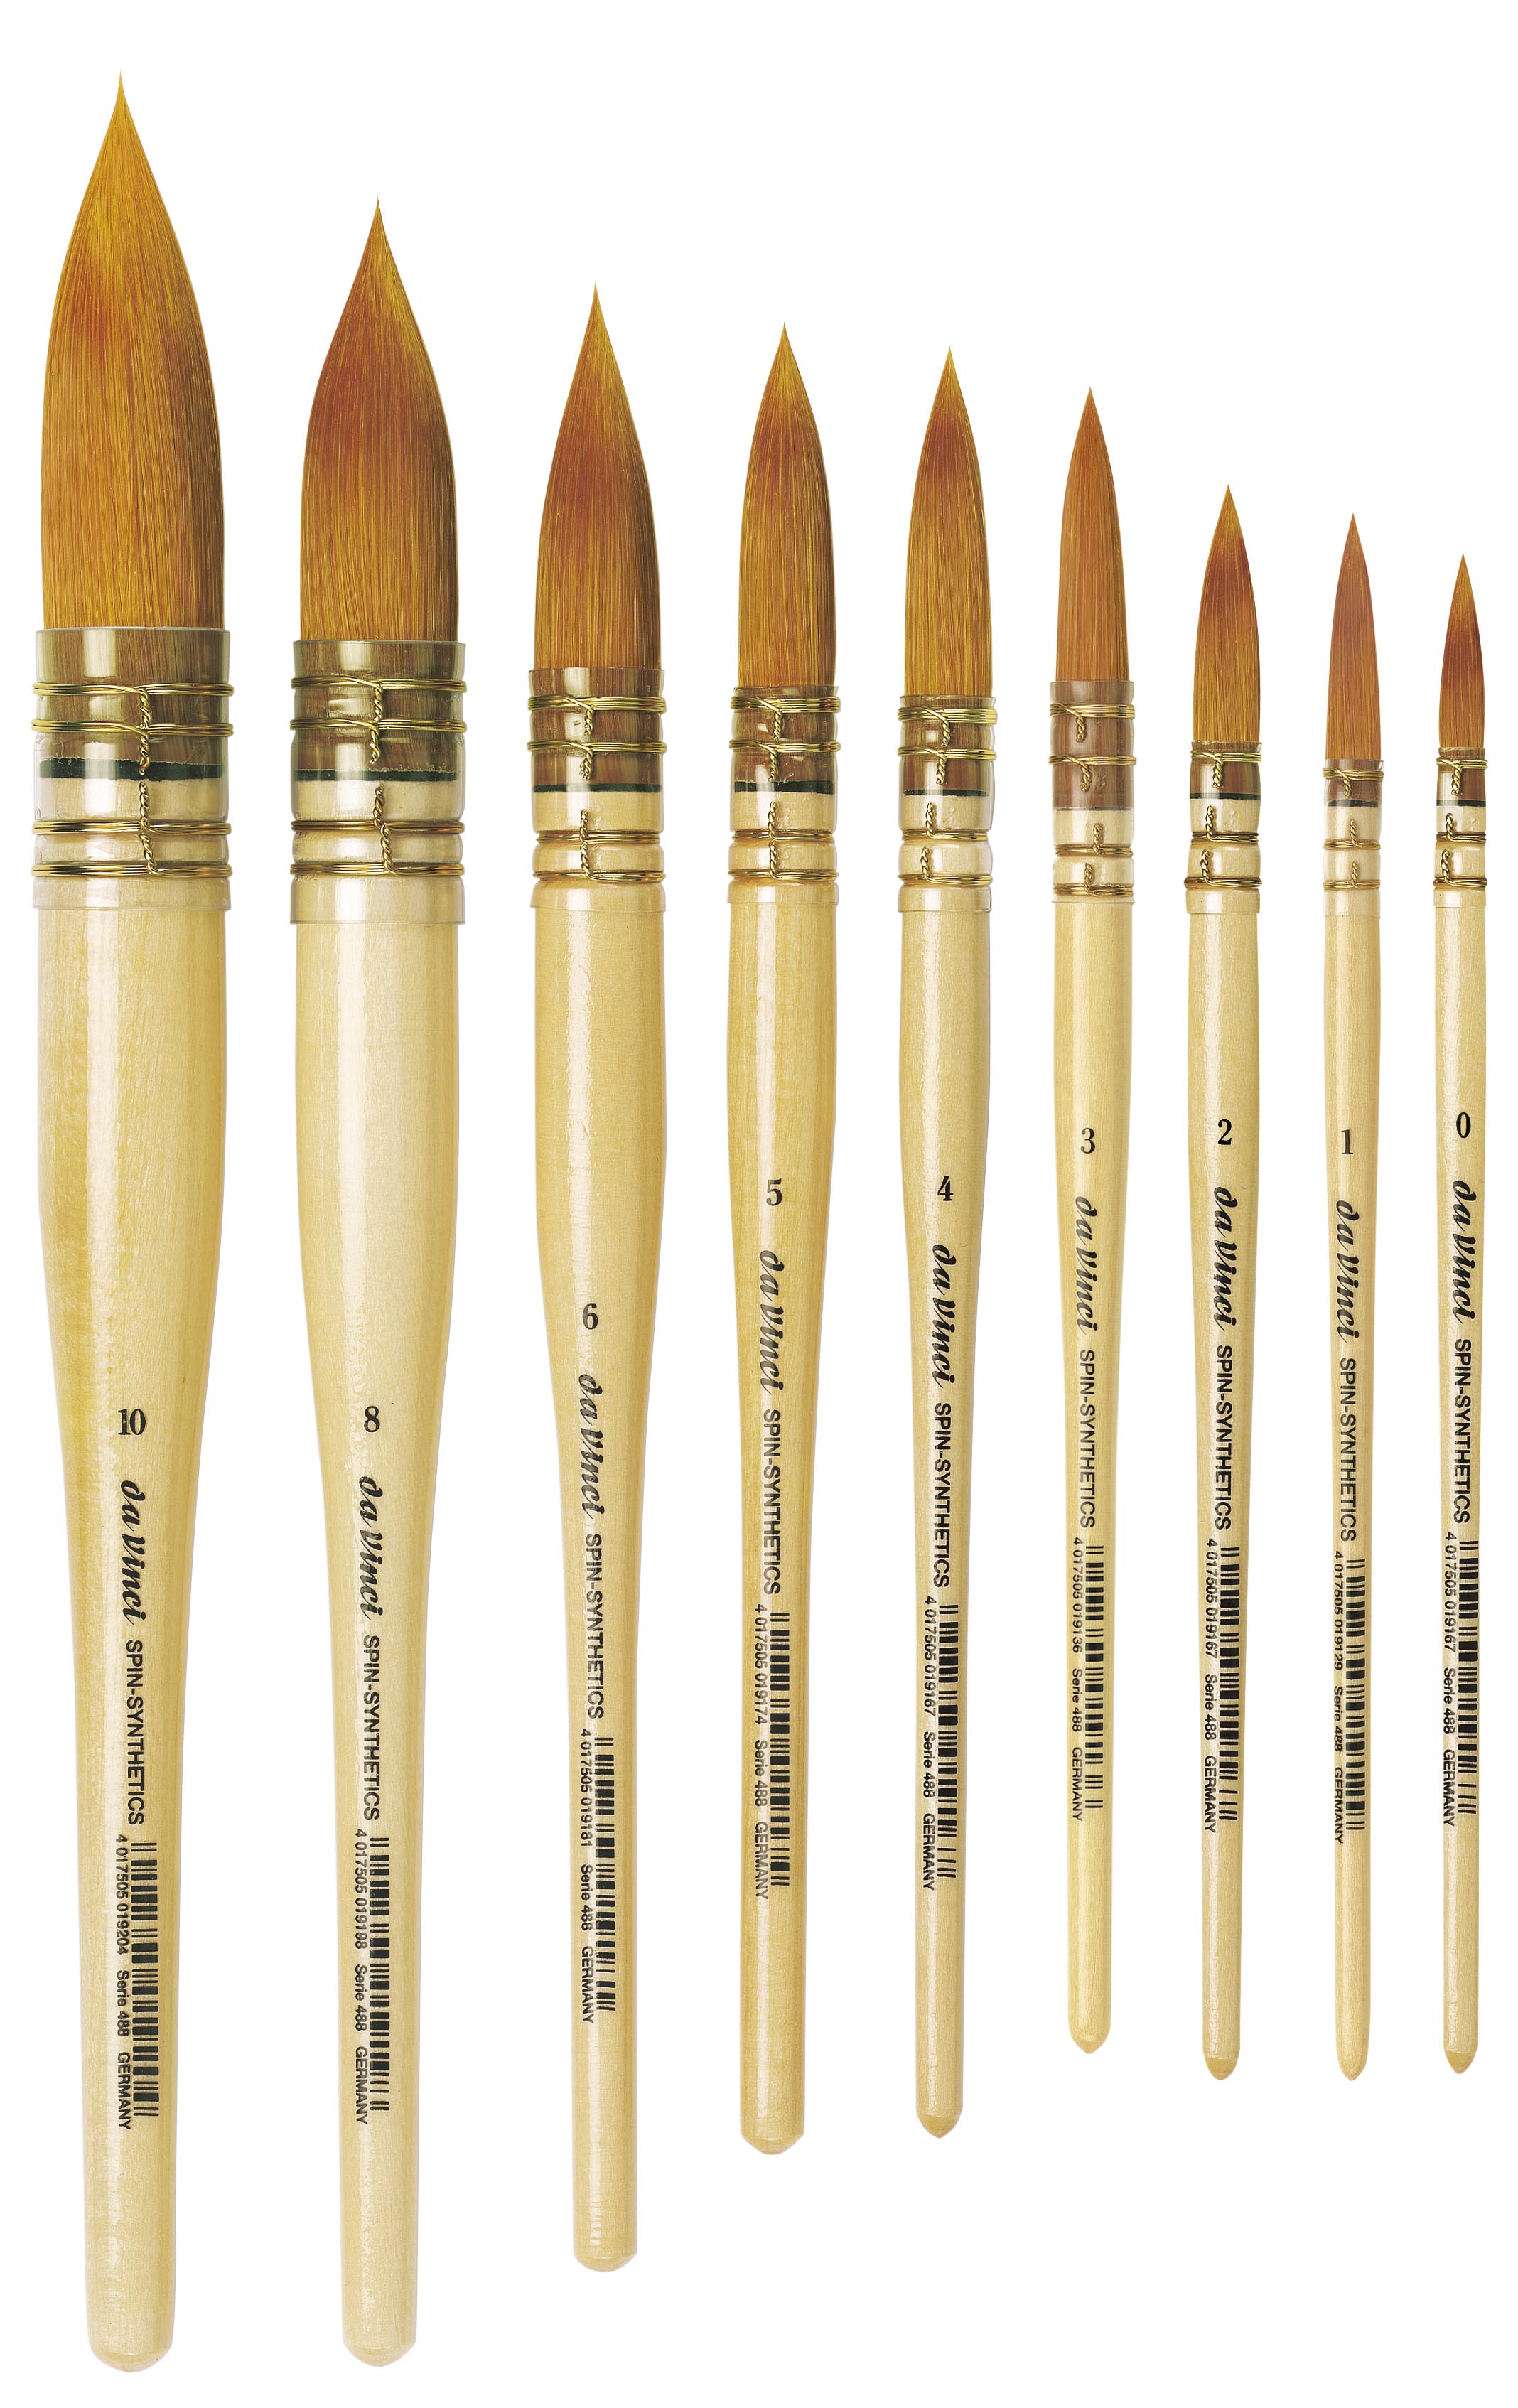 Five tips for looking after your brushes